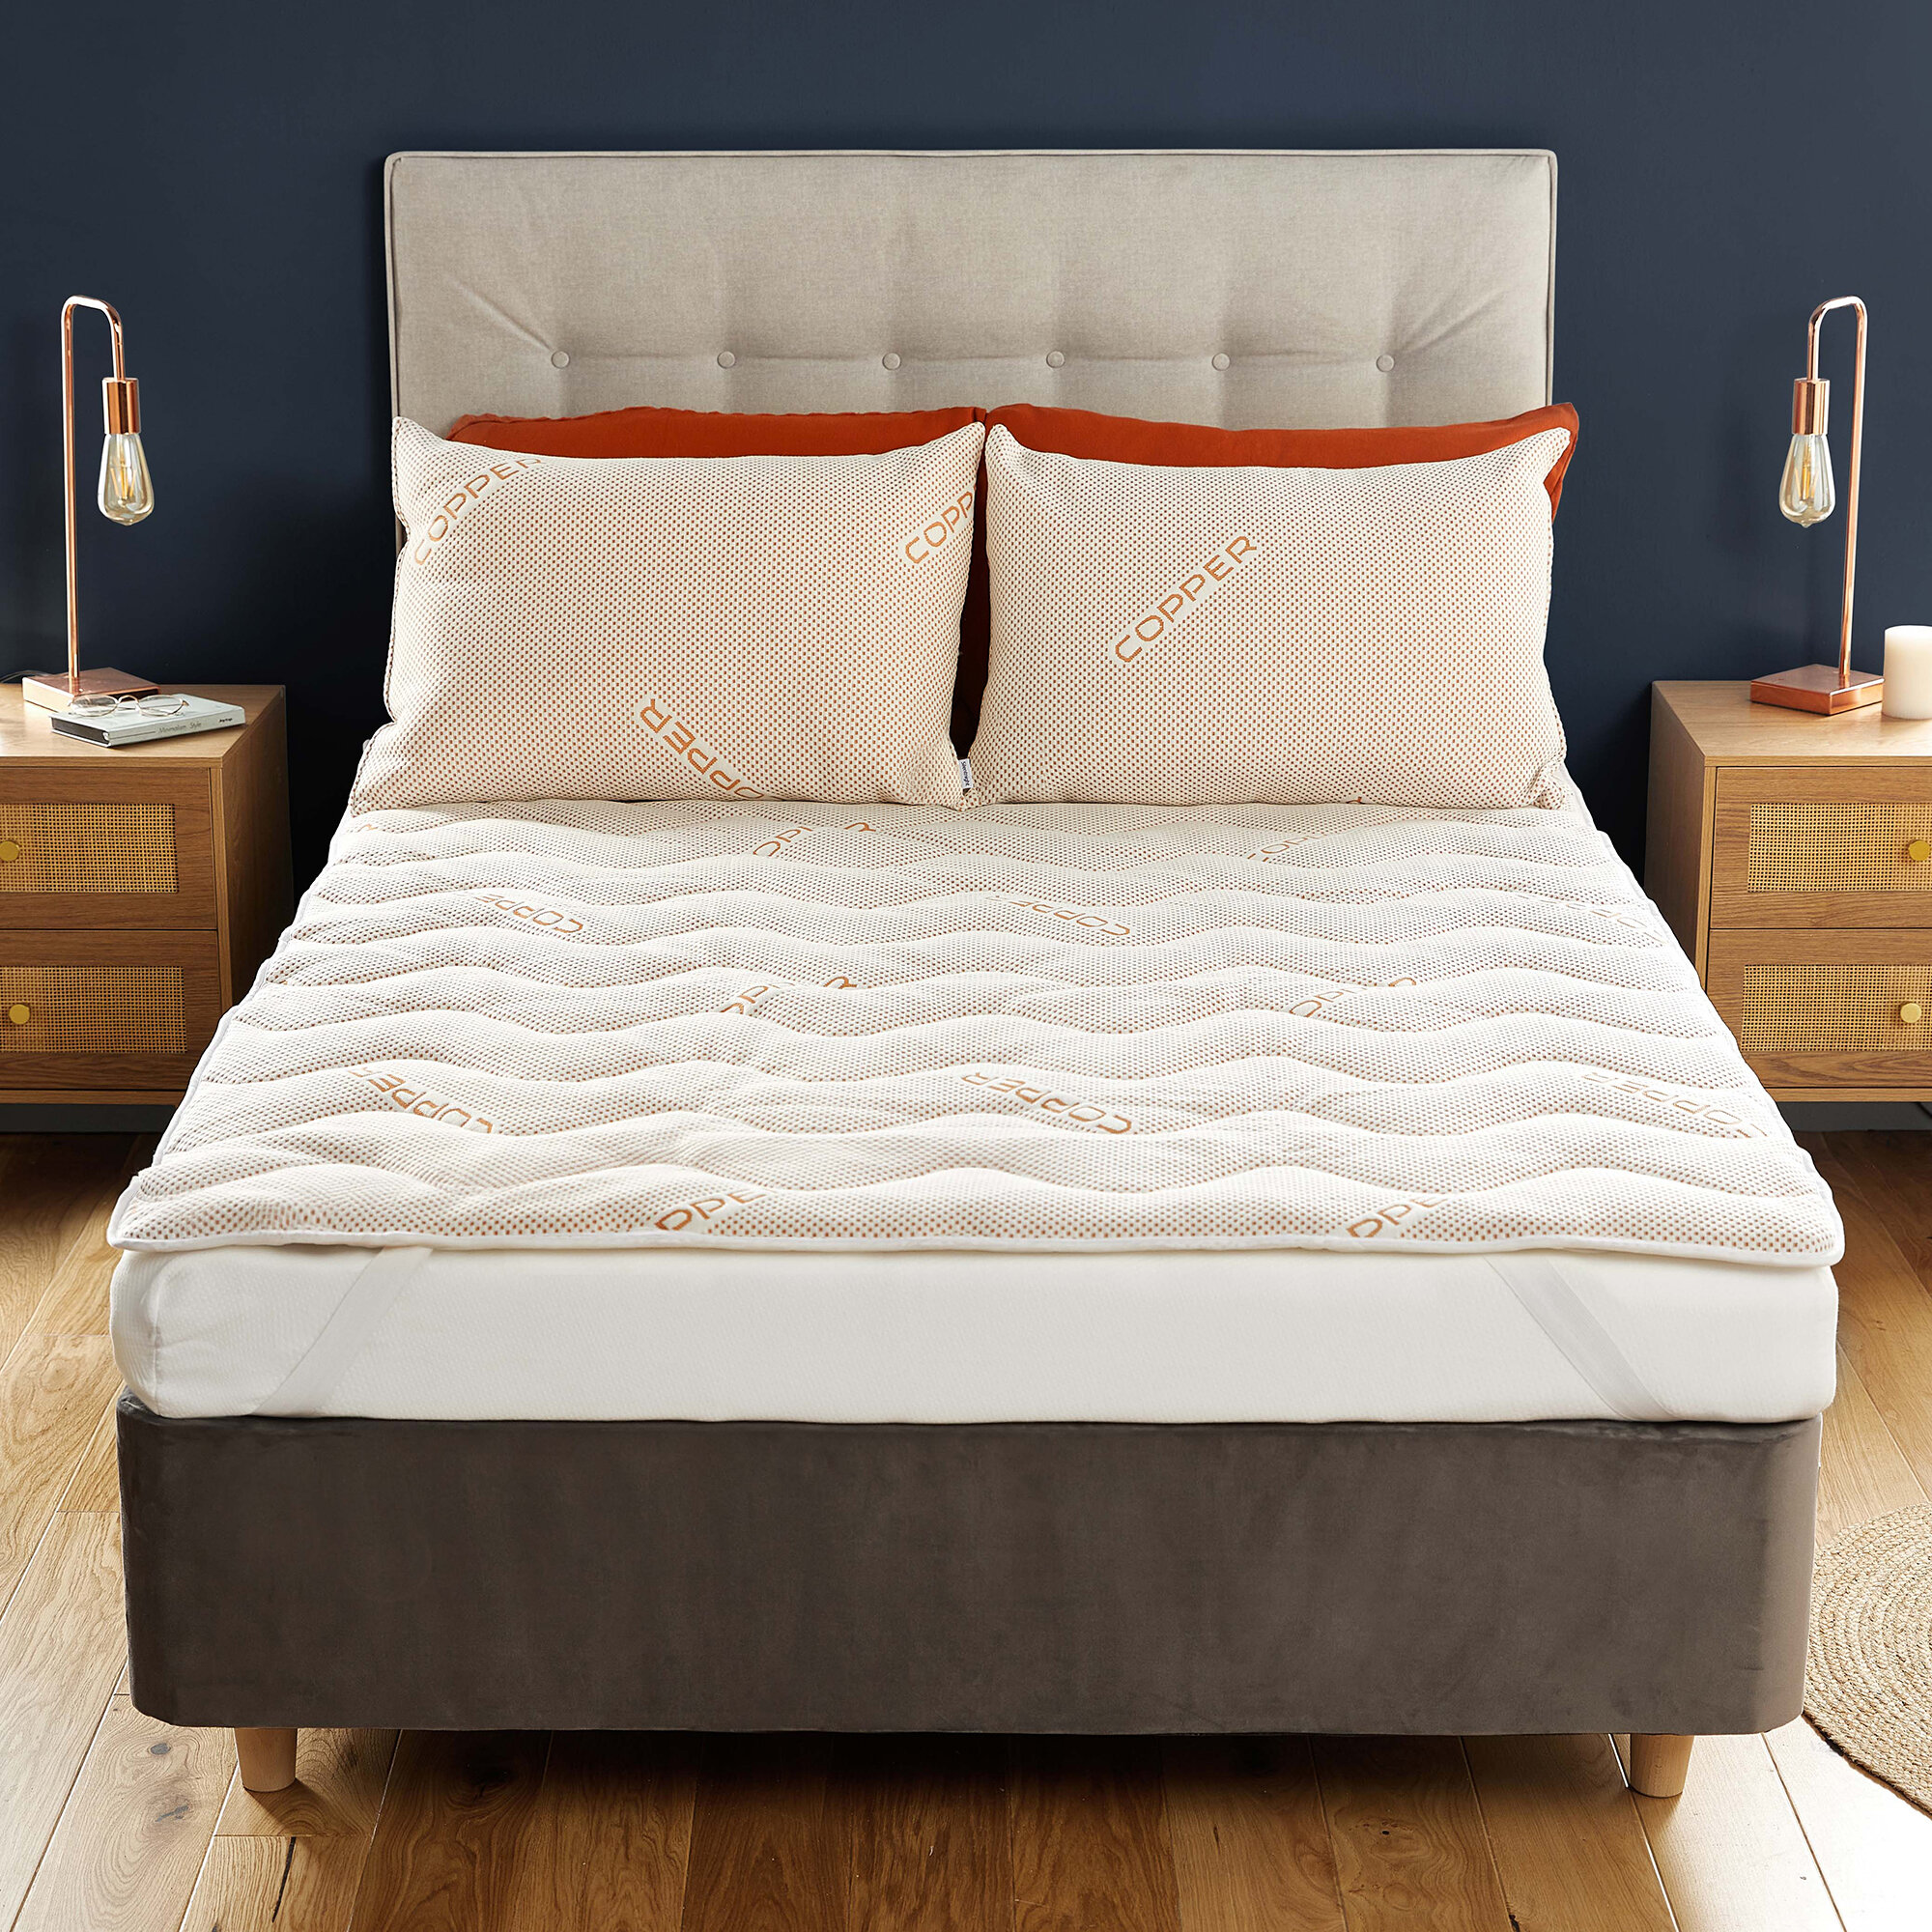 Silentnight Wellbeing Copper Infused Mattress Topper & Reviews